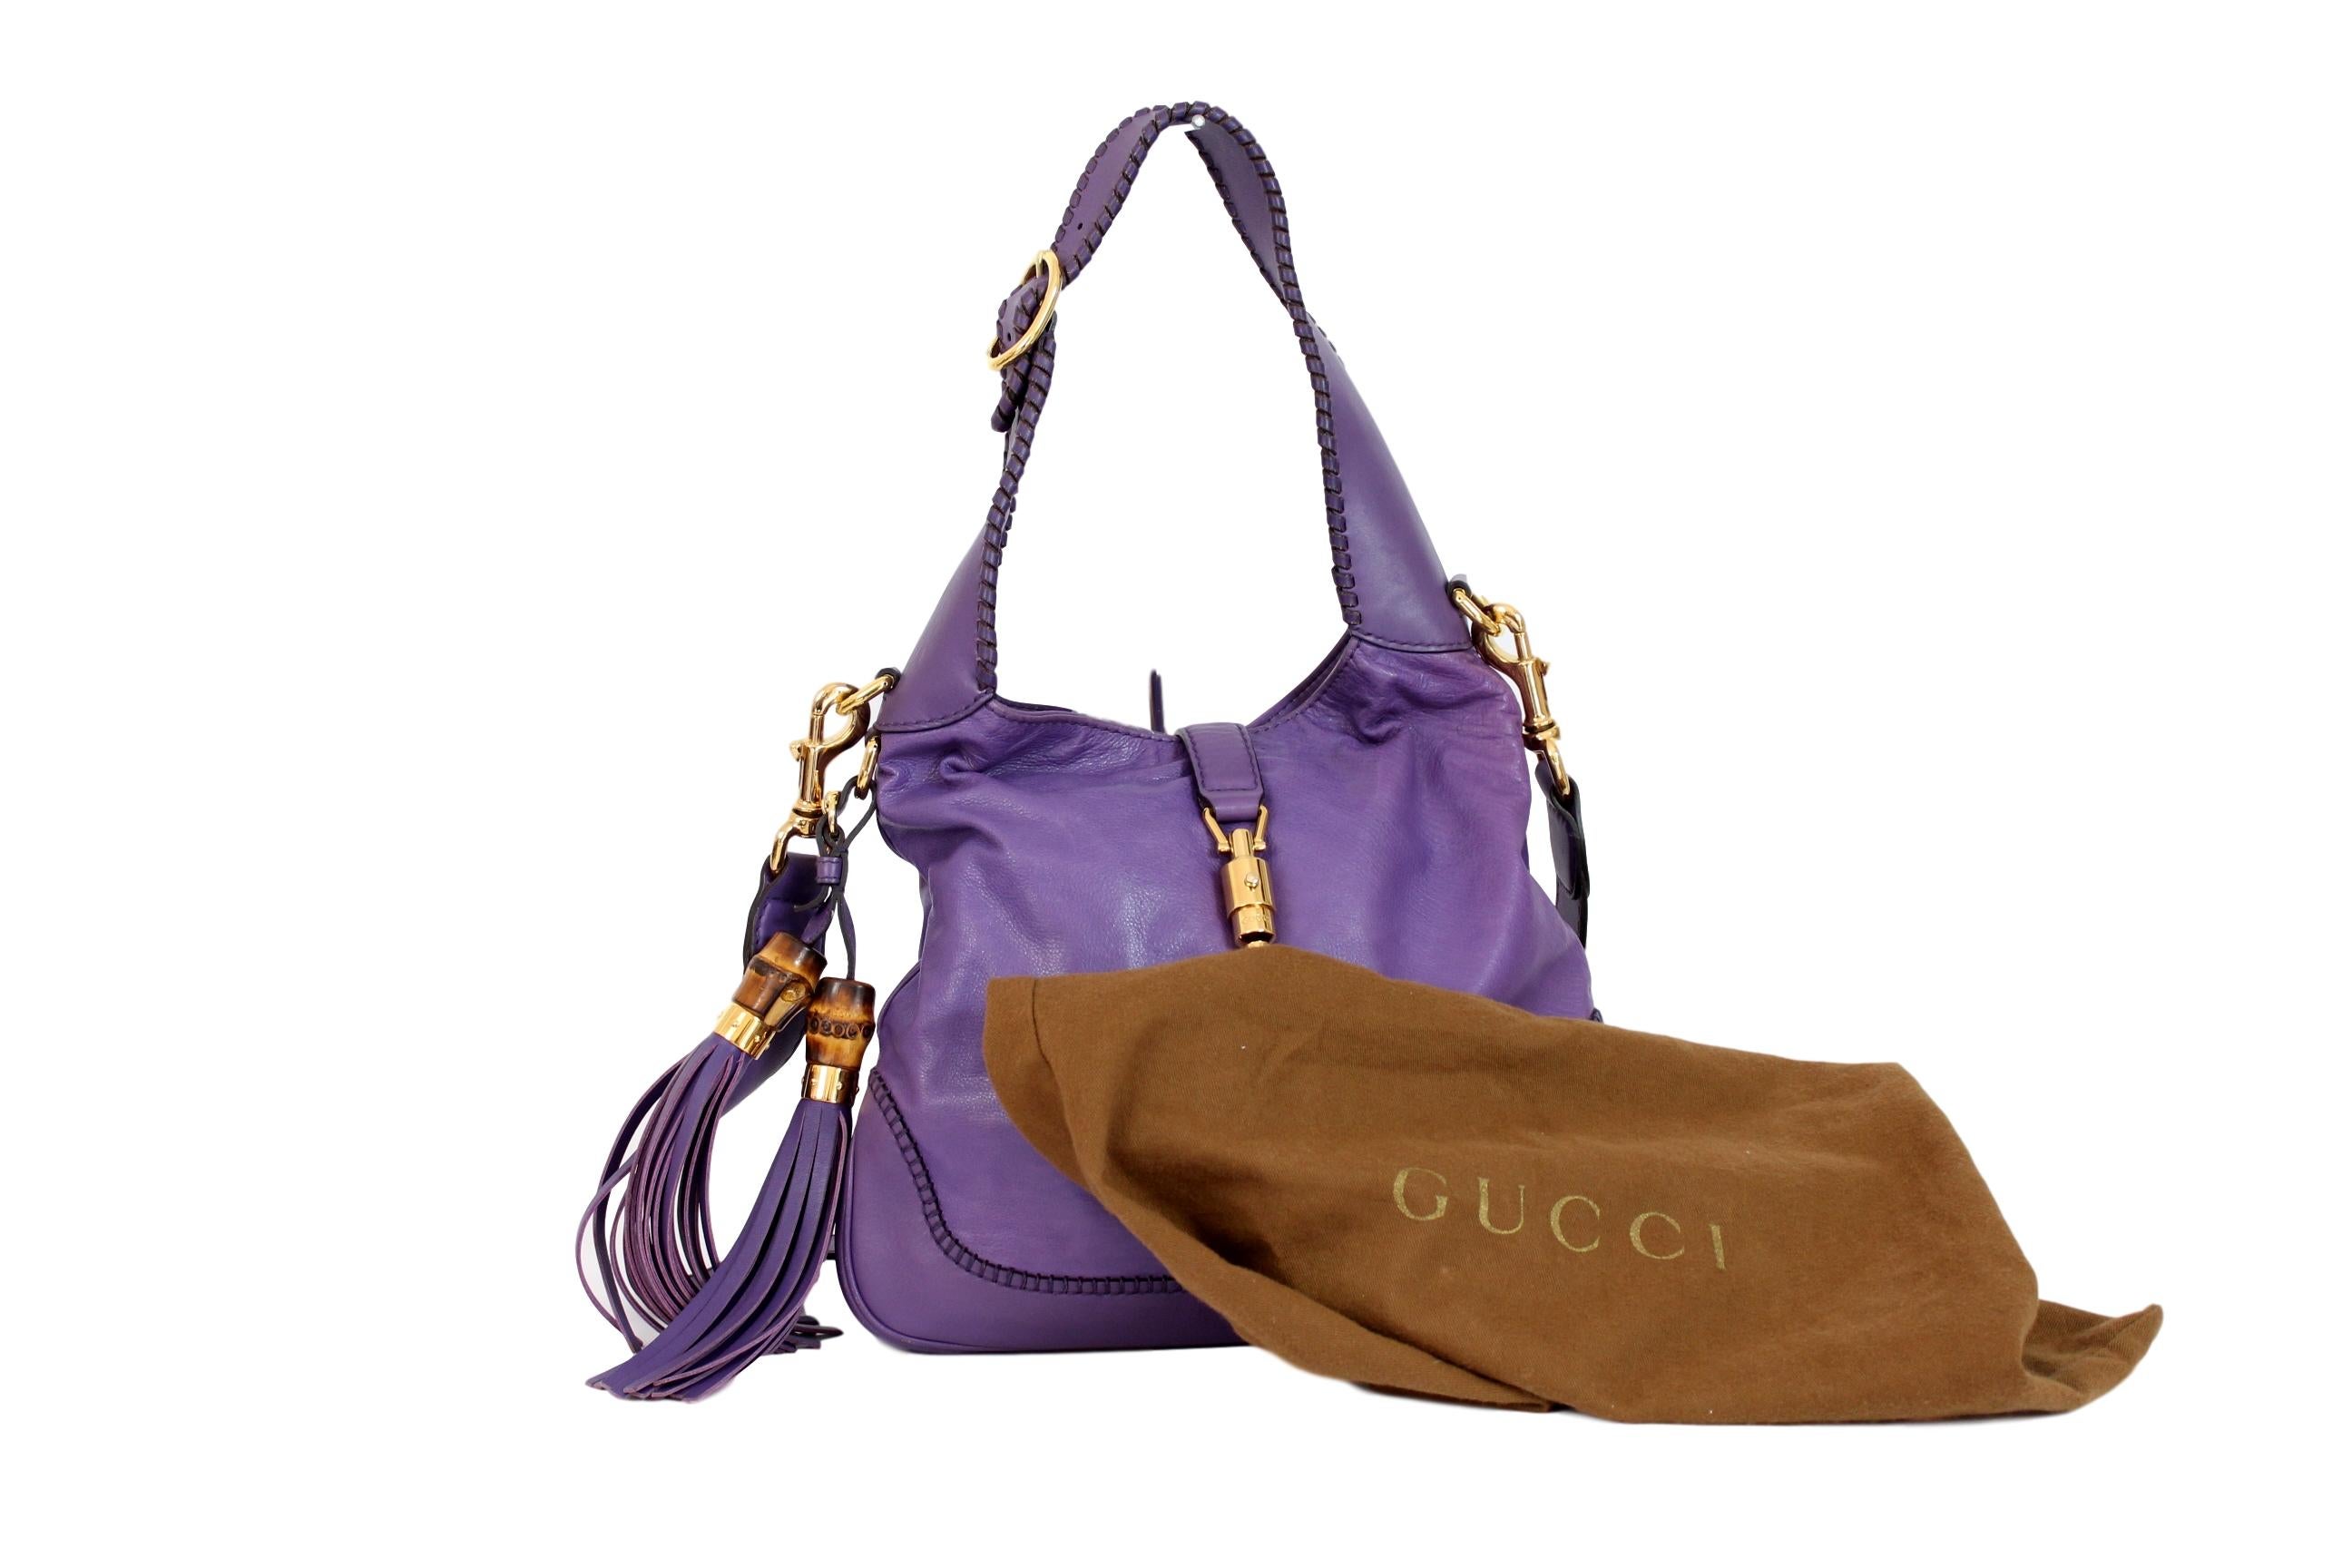 Gucci Jackie 2000s bag. Purple color with gold-colored details and bamboo tassels and fringes. Piston hook closure. It can be carried either on the shoulder with an adjustable shoulder strap or by hand. Inner pockets. 100% leather. Made in Italy.